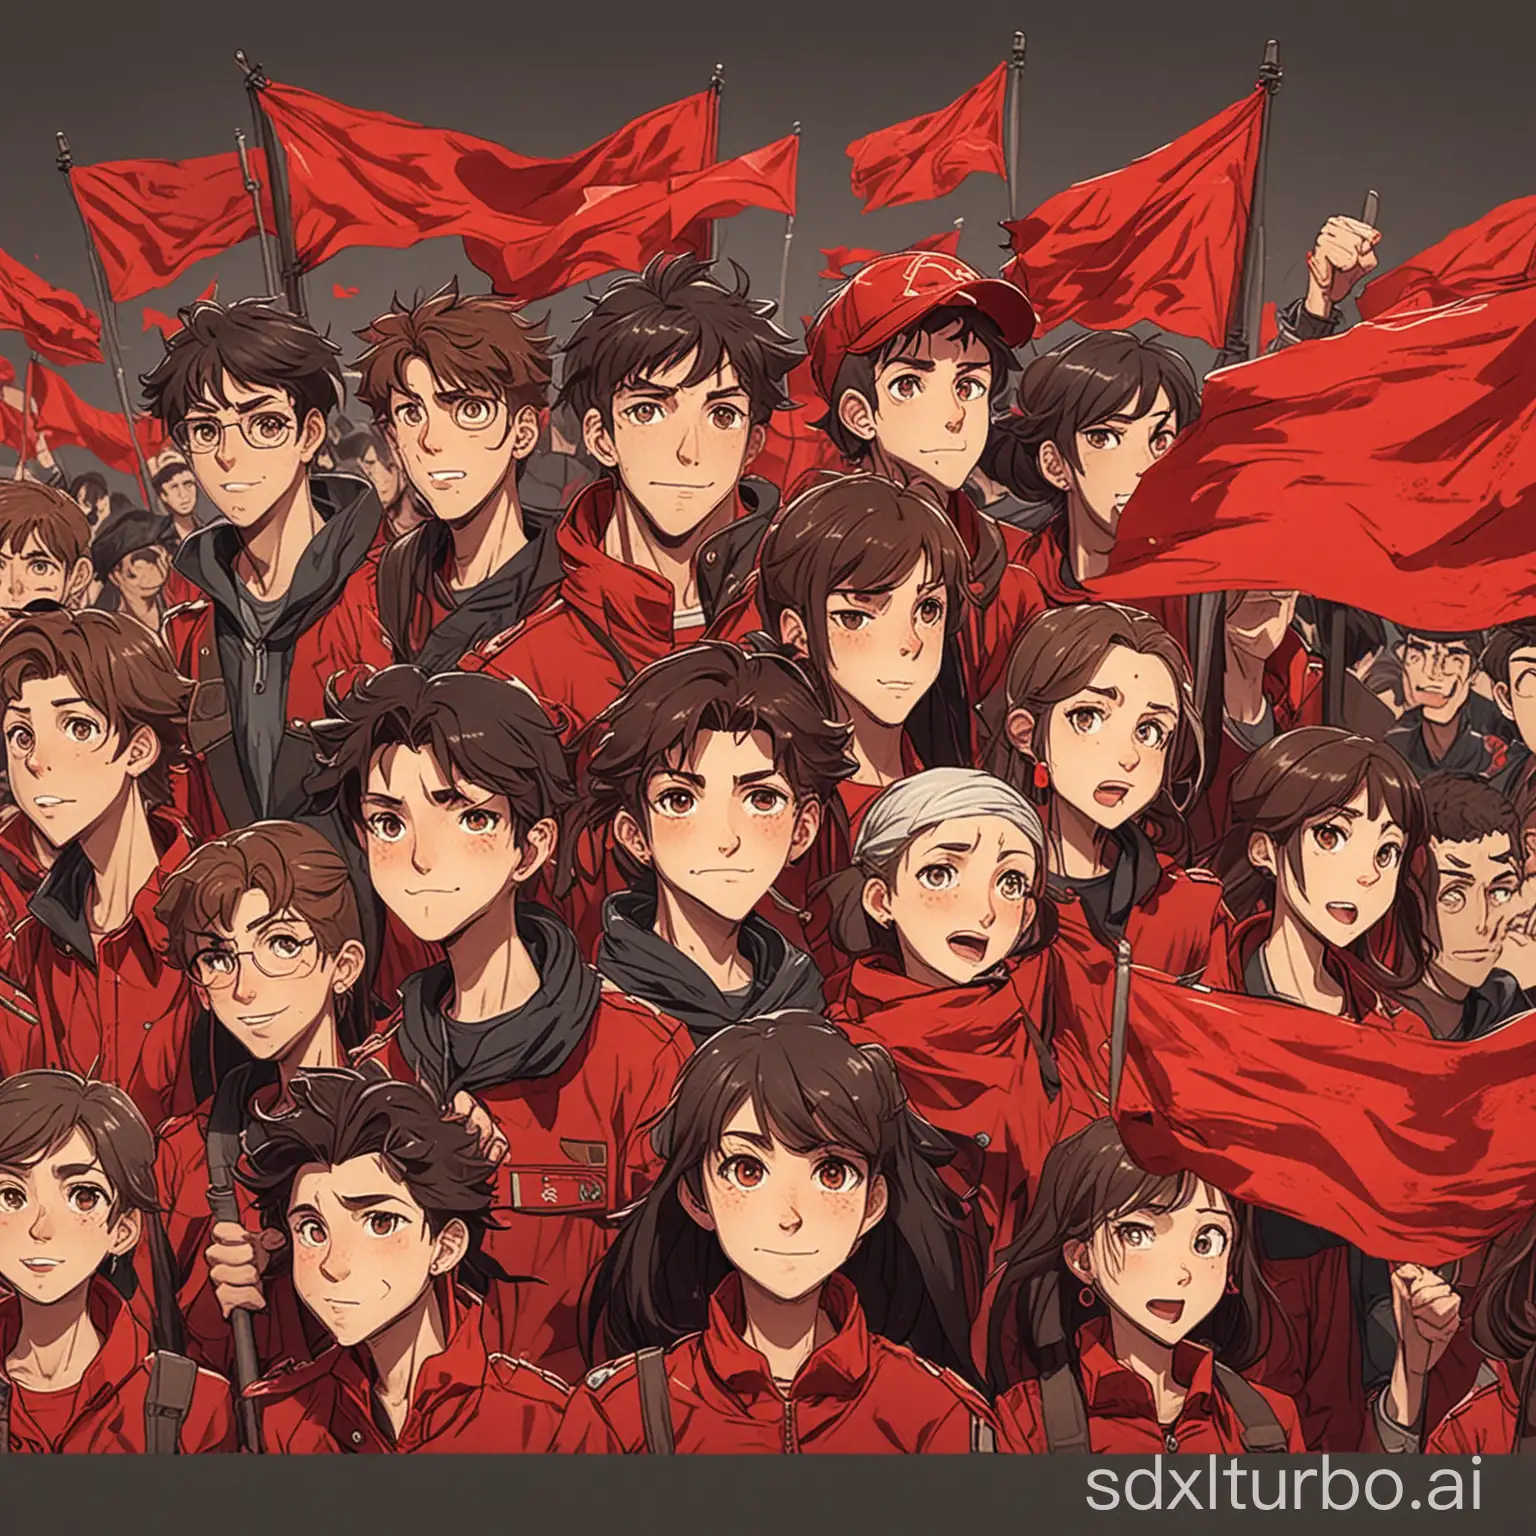 young people of the animated Red Flag